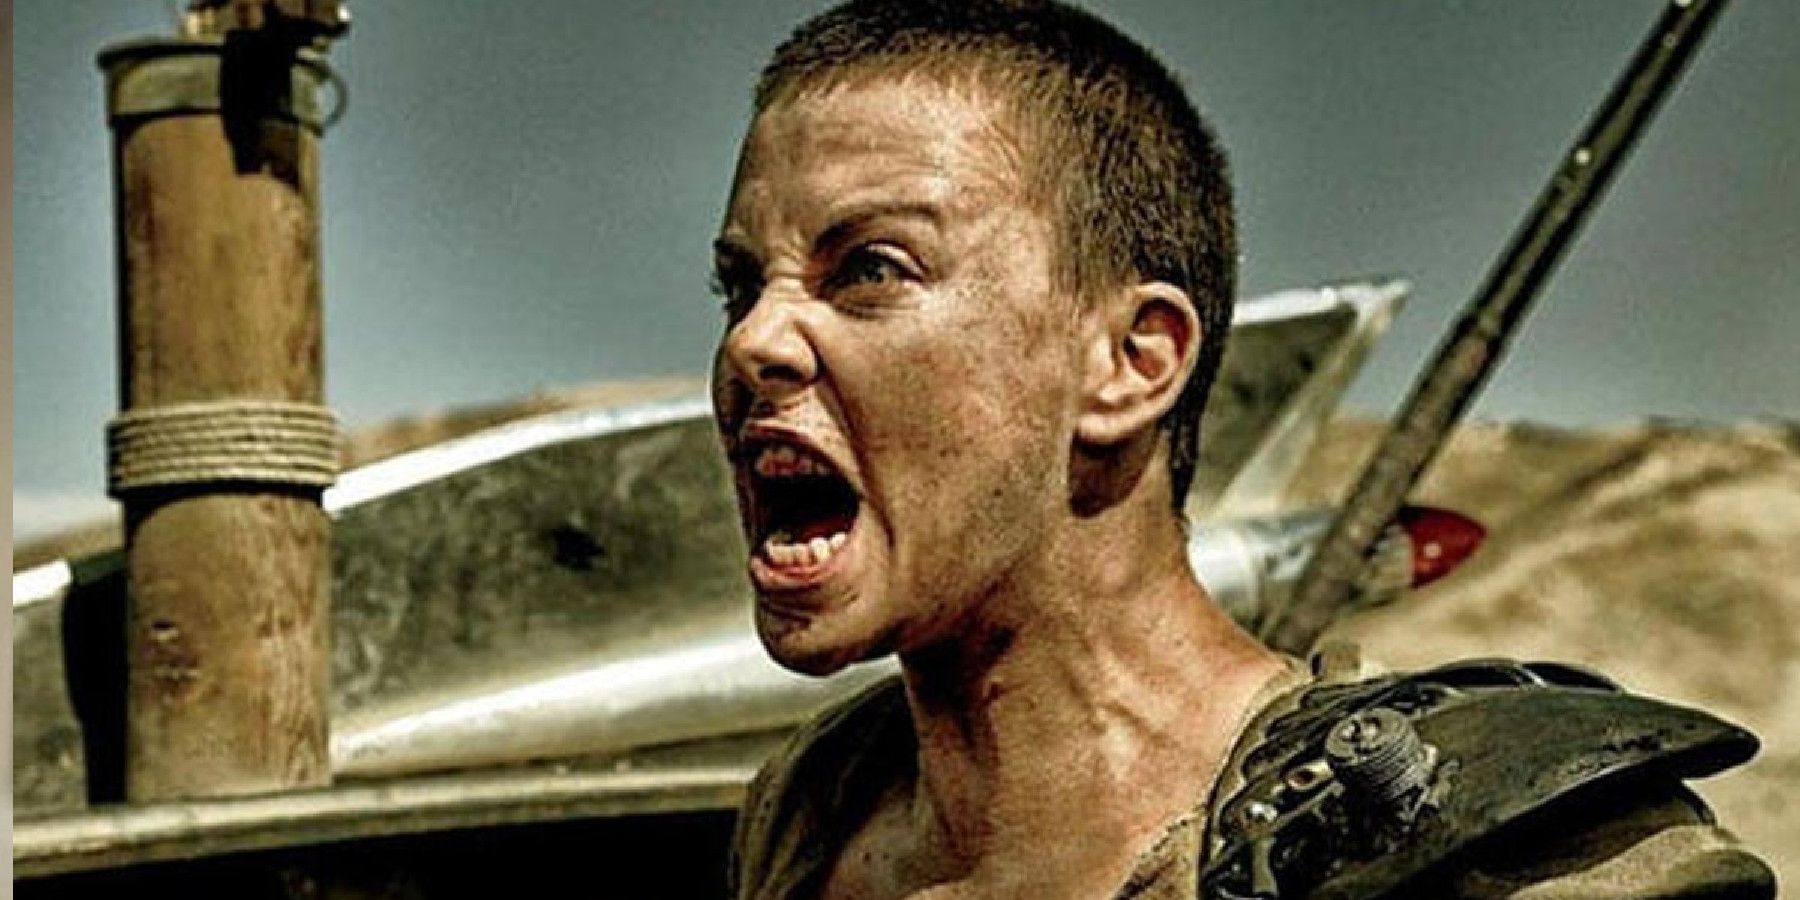 Charlize Theron as Imperator Furiosa screaming in Mad Max Fury Road